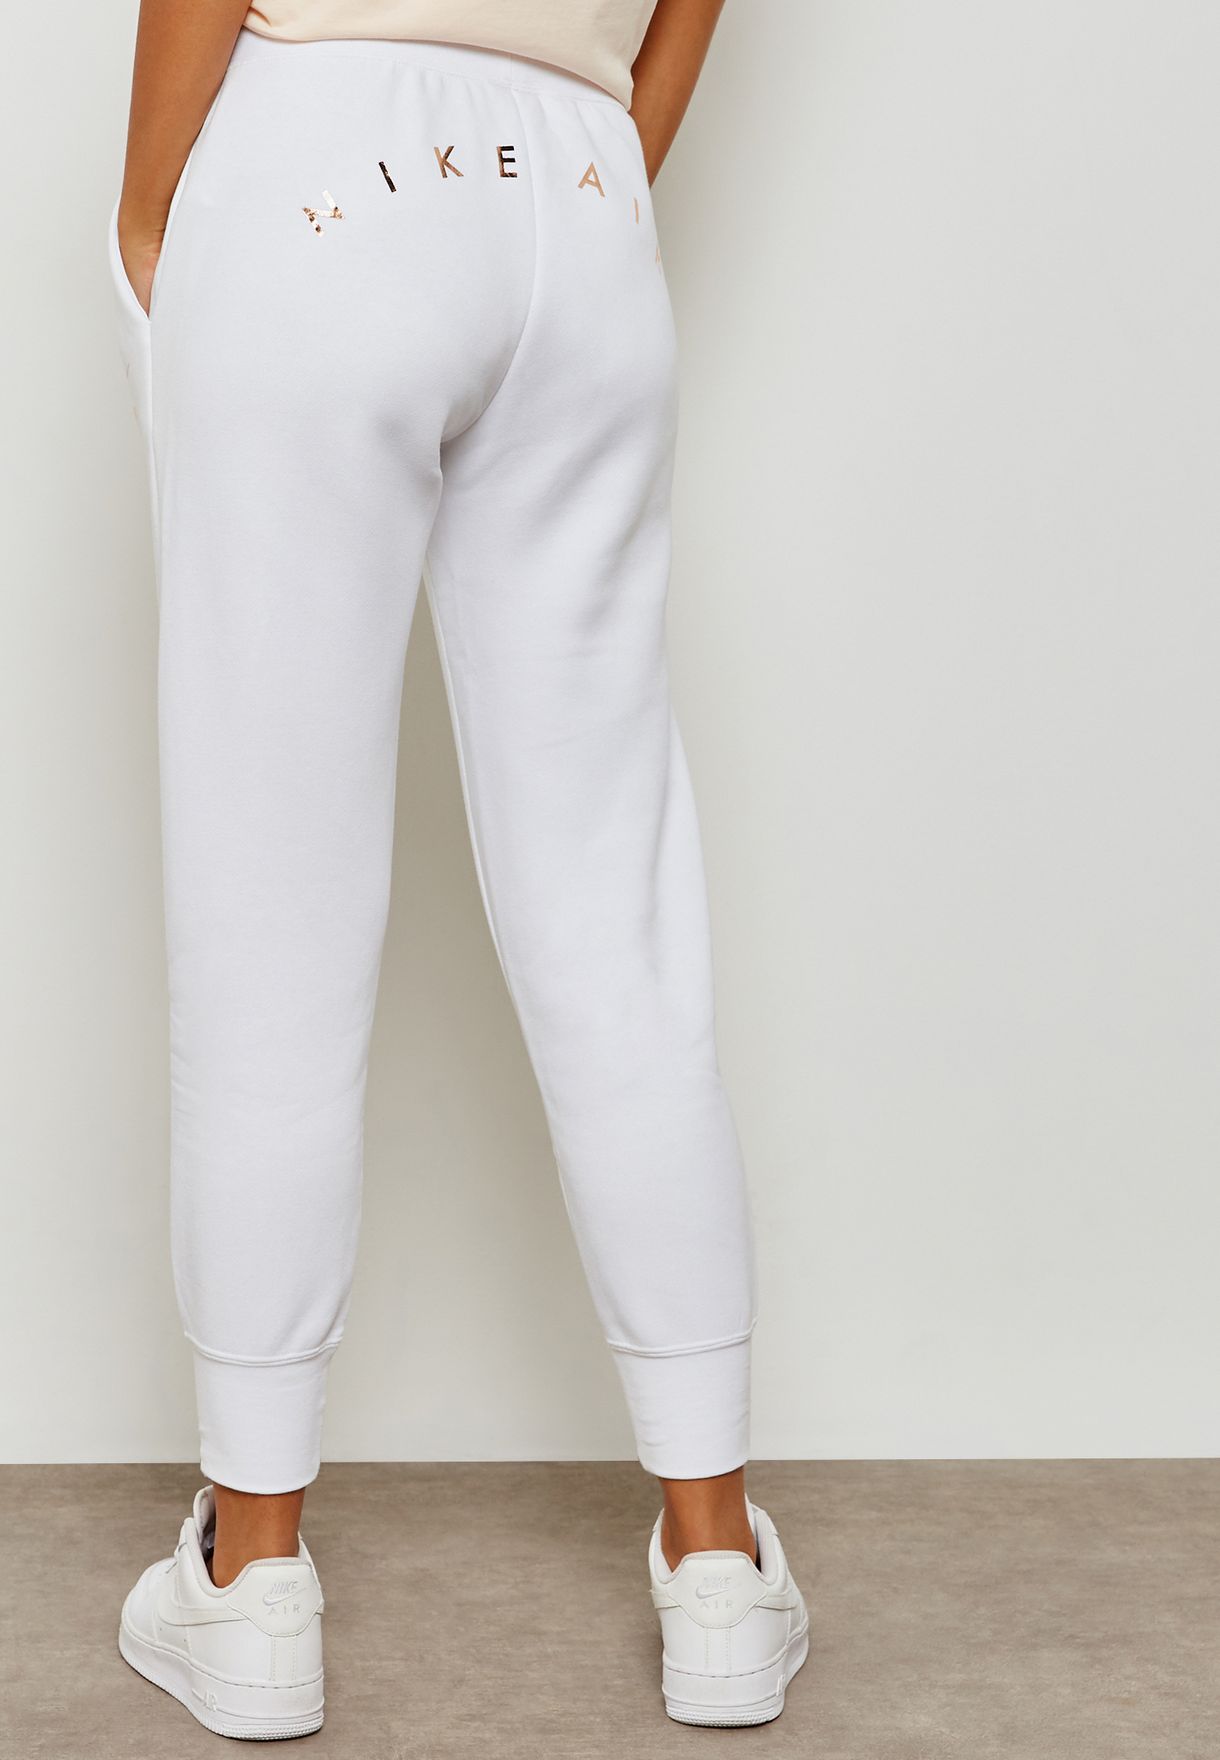 Buy Nike white Rally Air Sweatpants for 